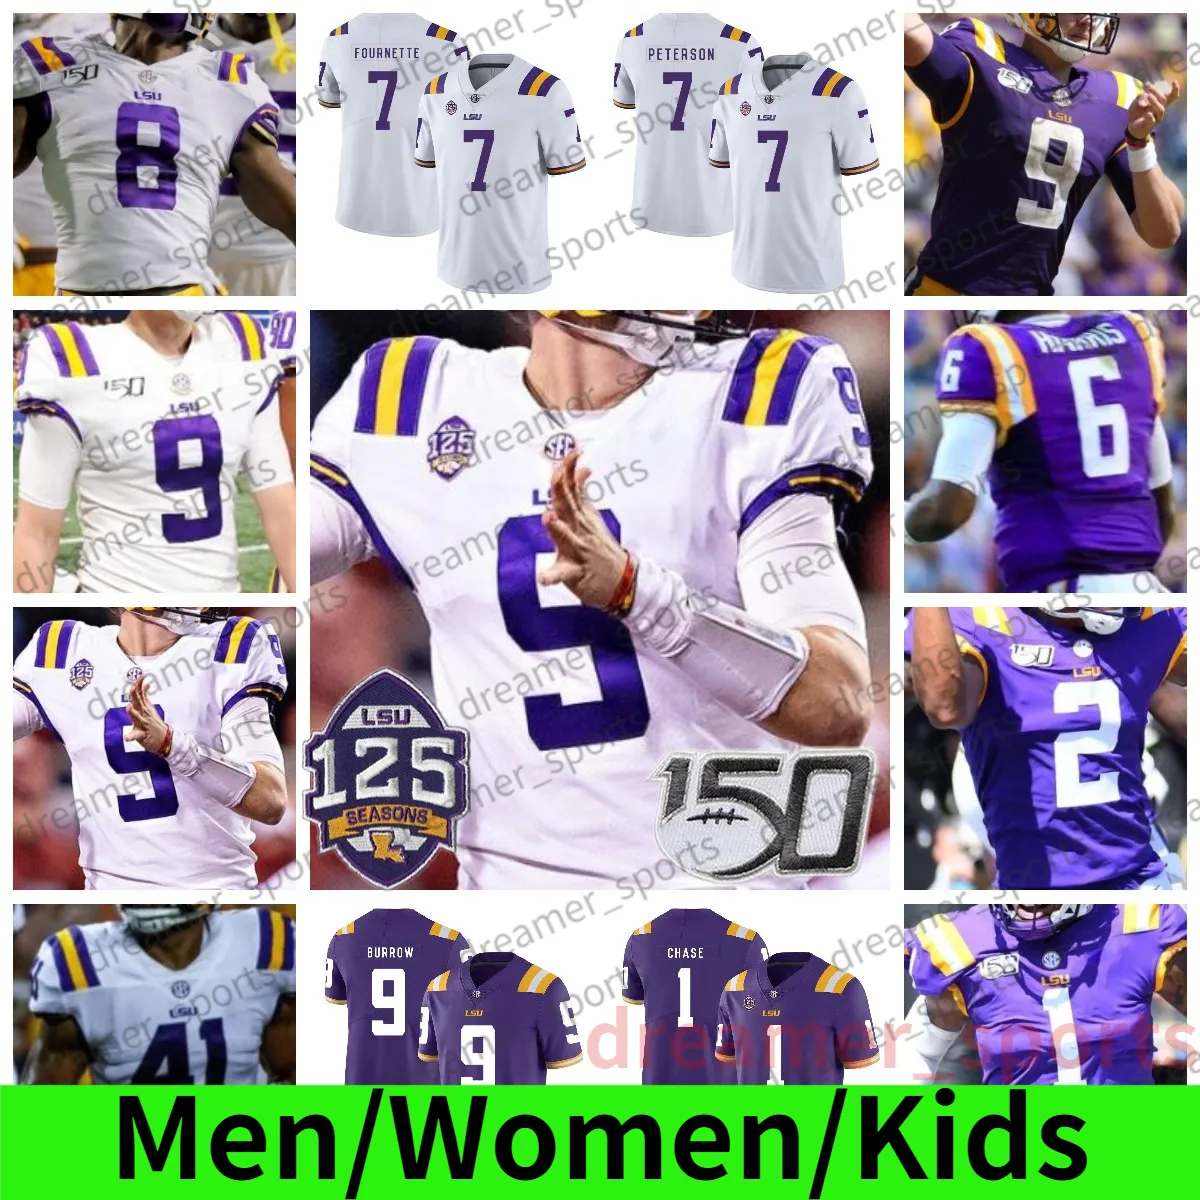 LSU Tigers voetbalshirt Burrow Justin Jefferson Chase Grant Delpit Peterson Mathieu Marshall Guice Wit Custom College Jerseys Heren Dames Kinderen 125TH 150th